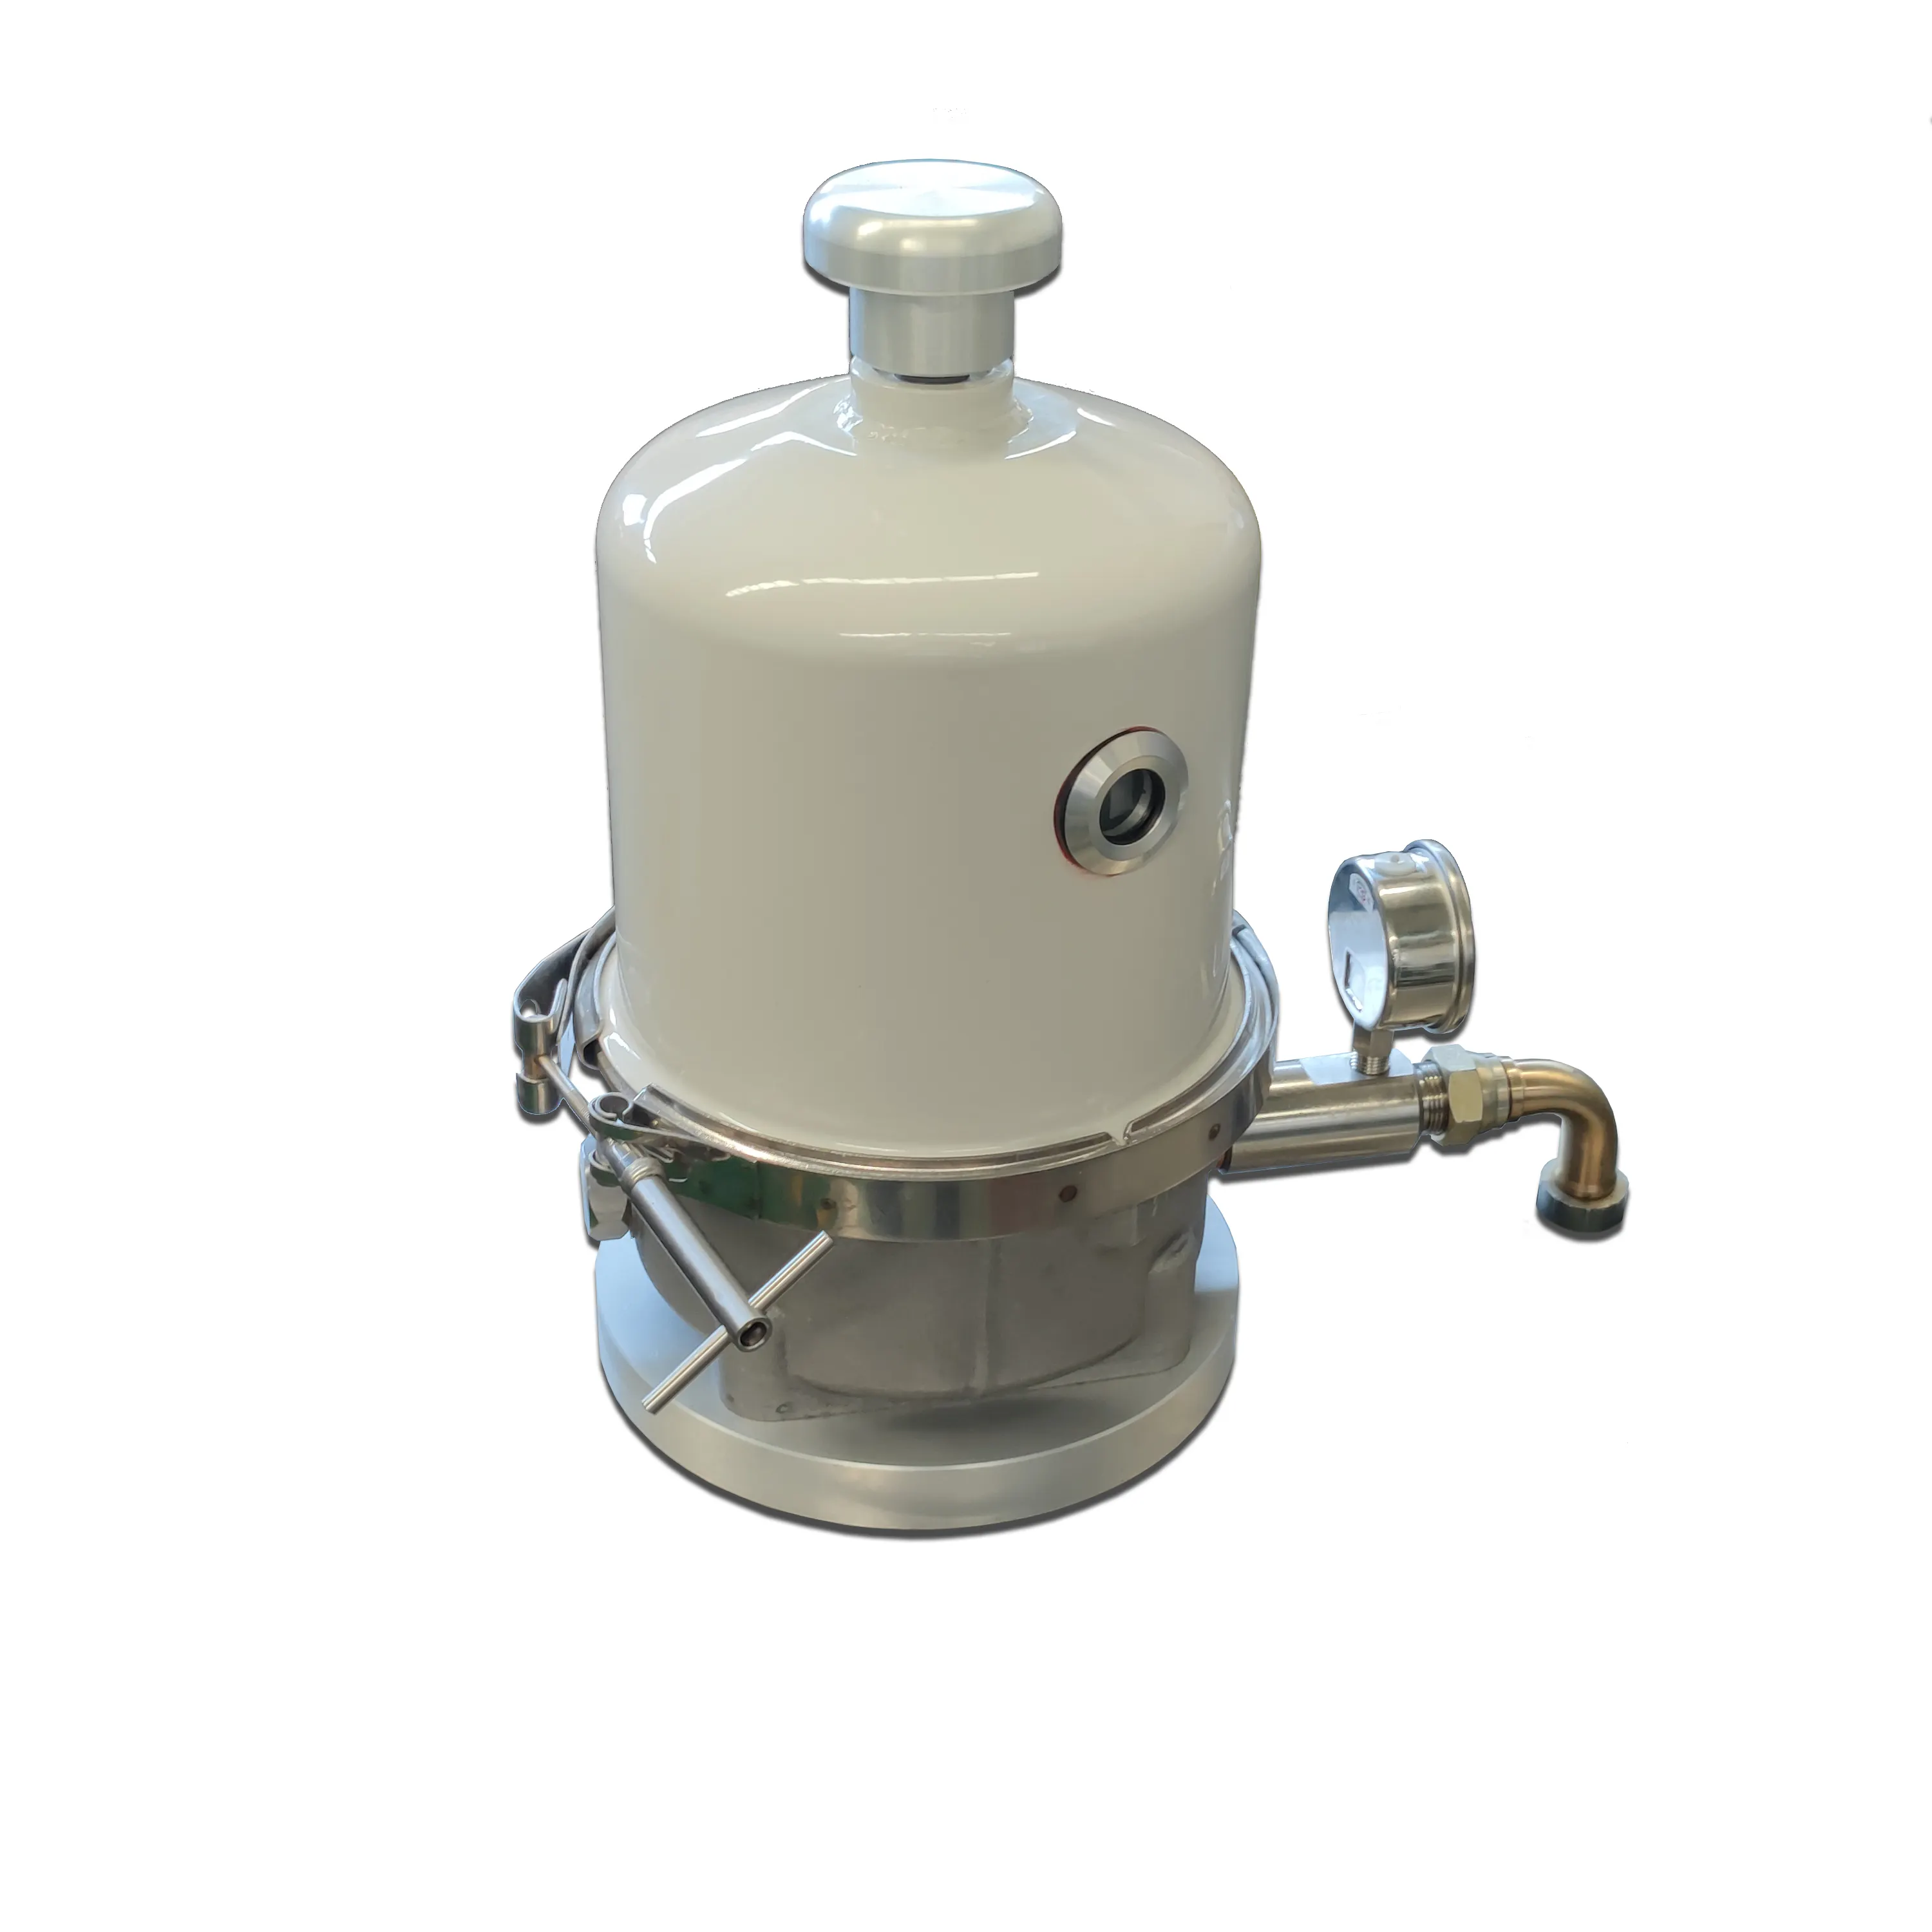 Oil filtration system for the grinding oil